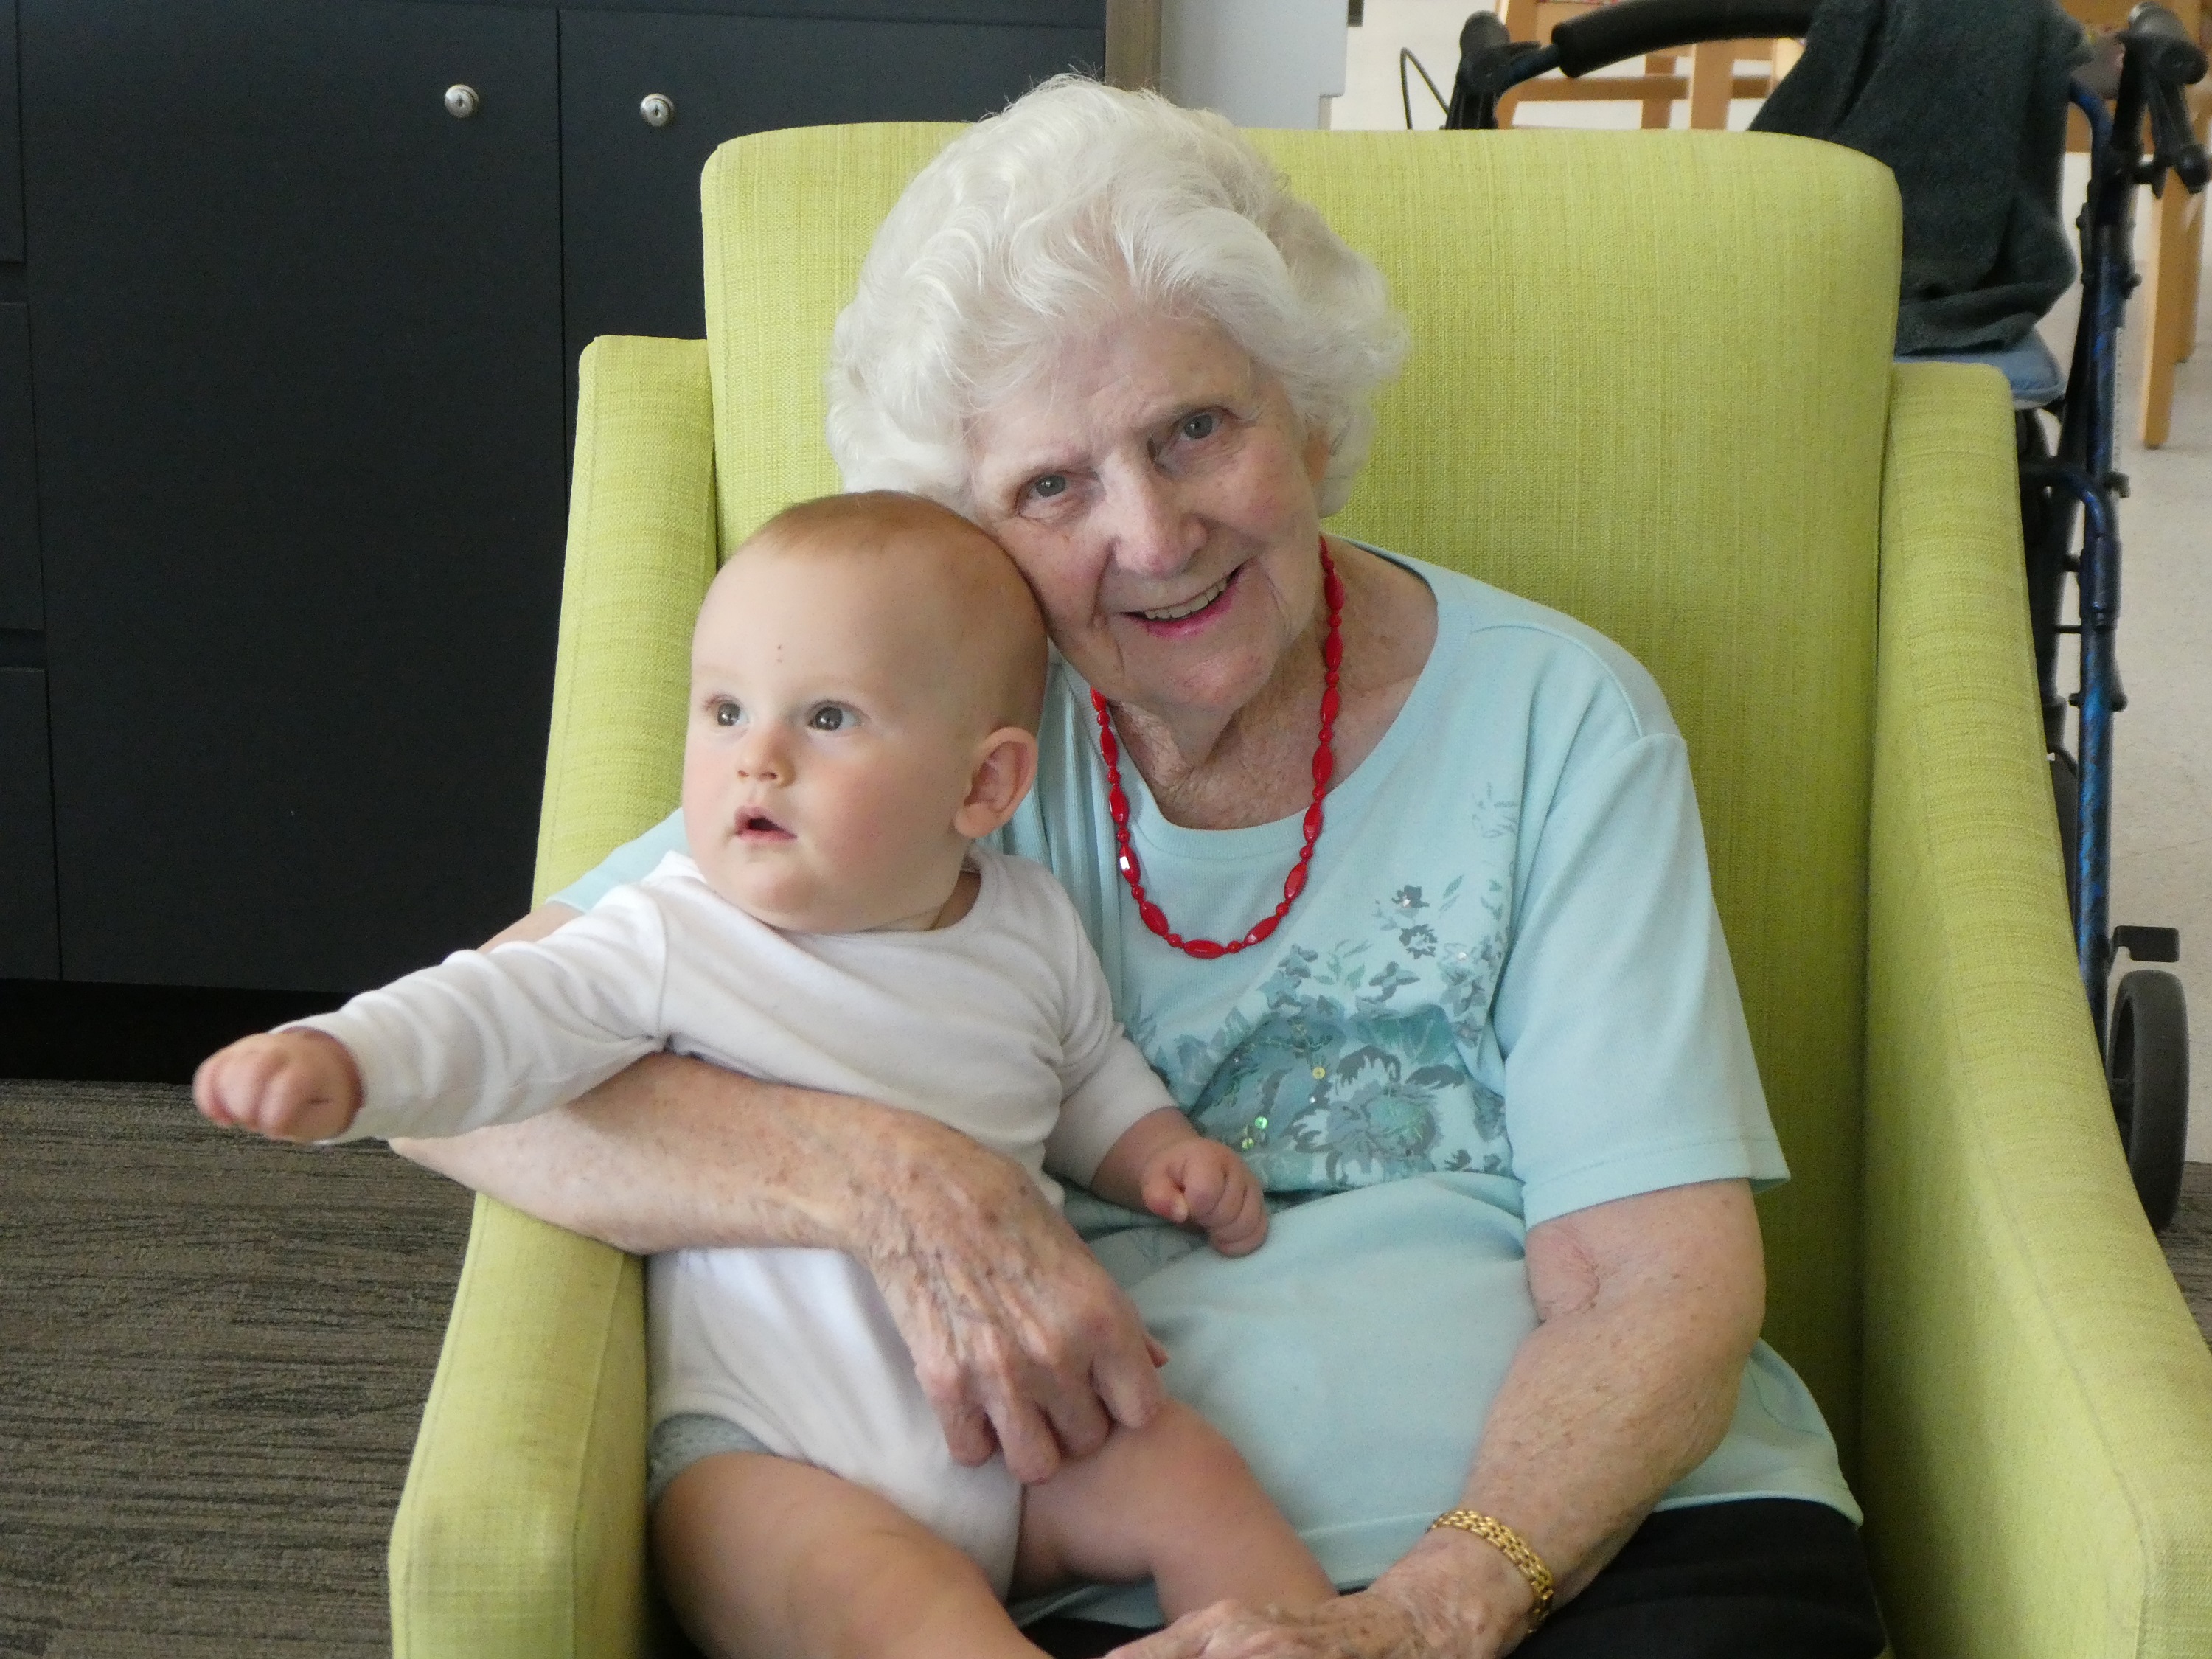 A Banksia Lodge Resident with a baby during an intergenerational playgroup